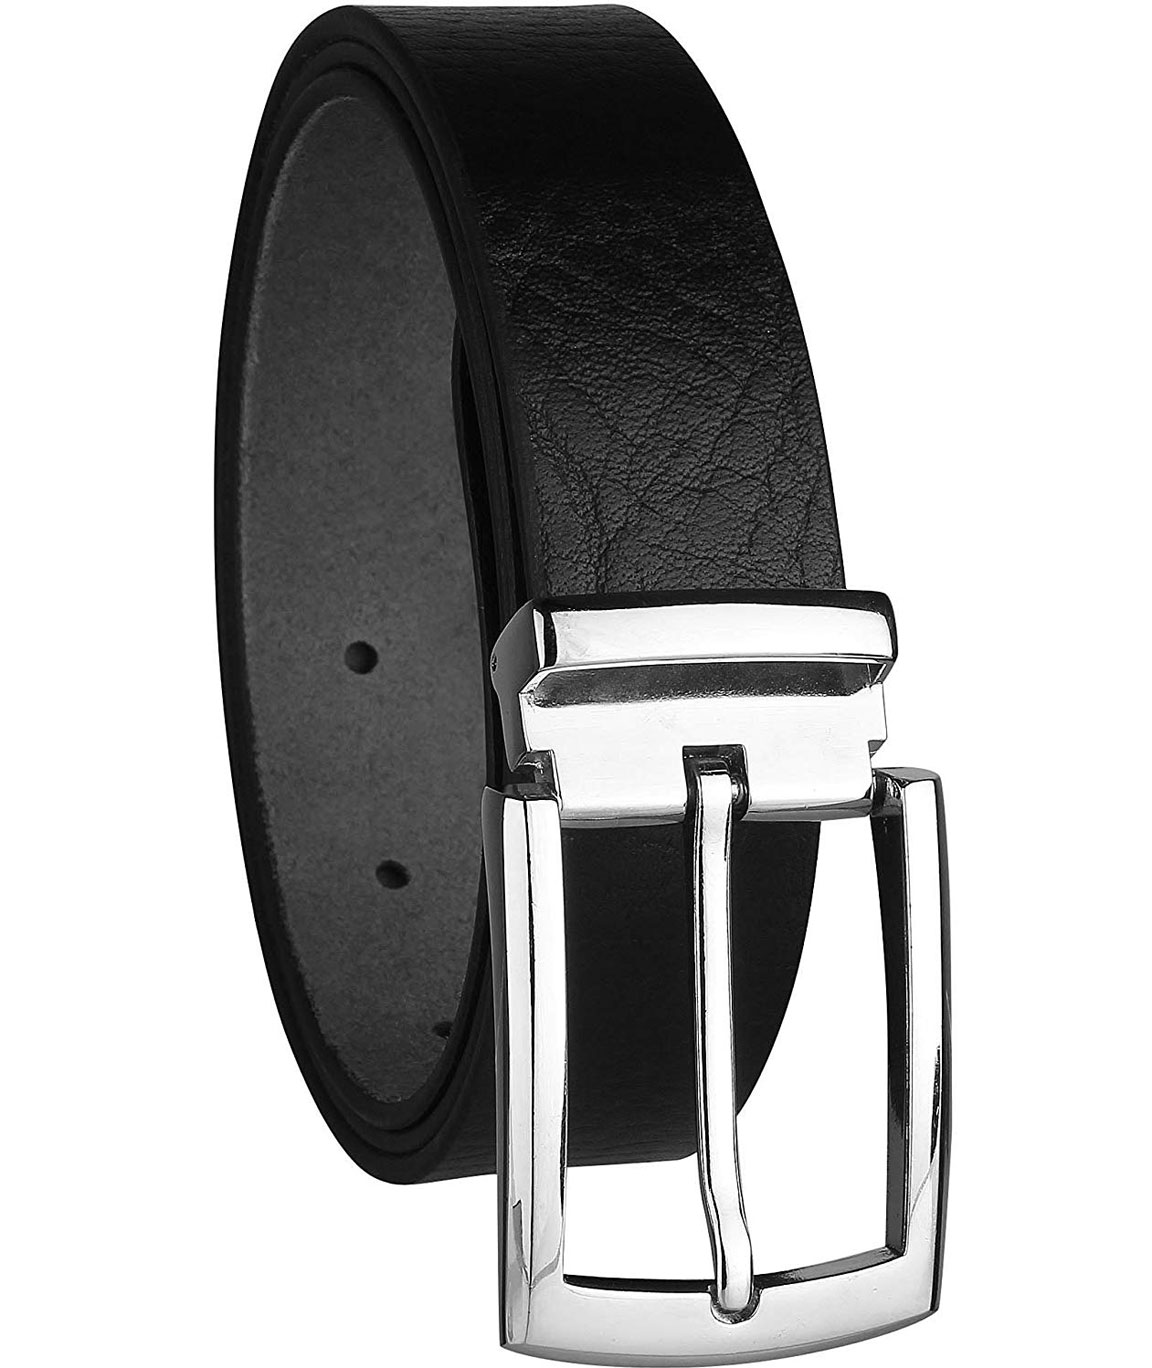 ZORO formal/casual black genuine leather belts for mens- 1 year guarantee, Gift for gents